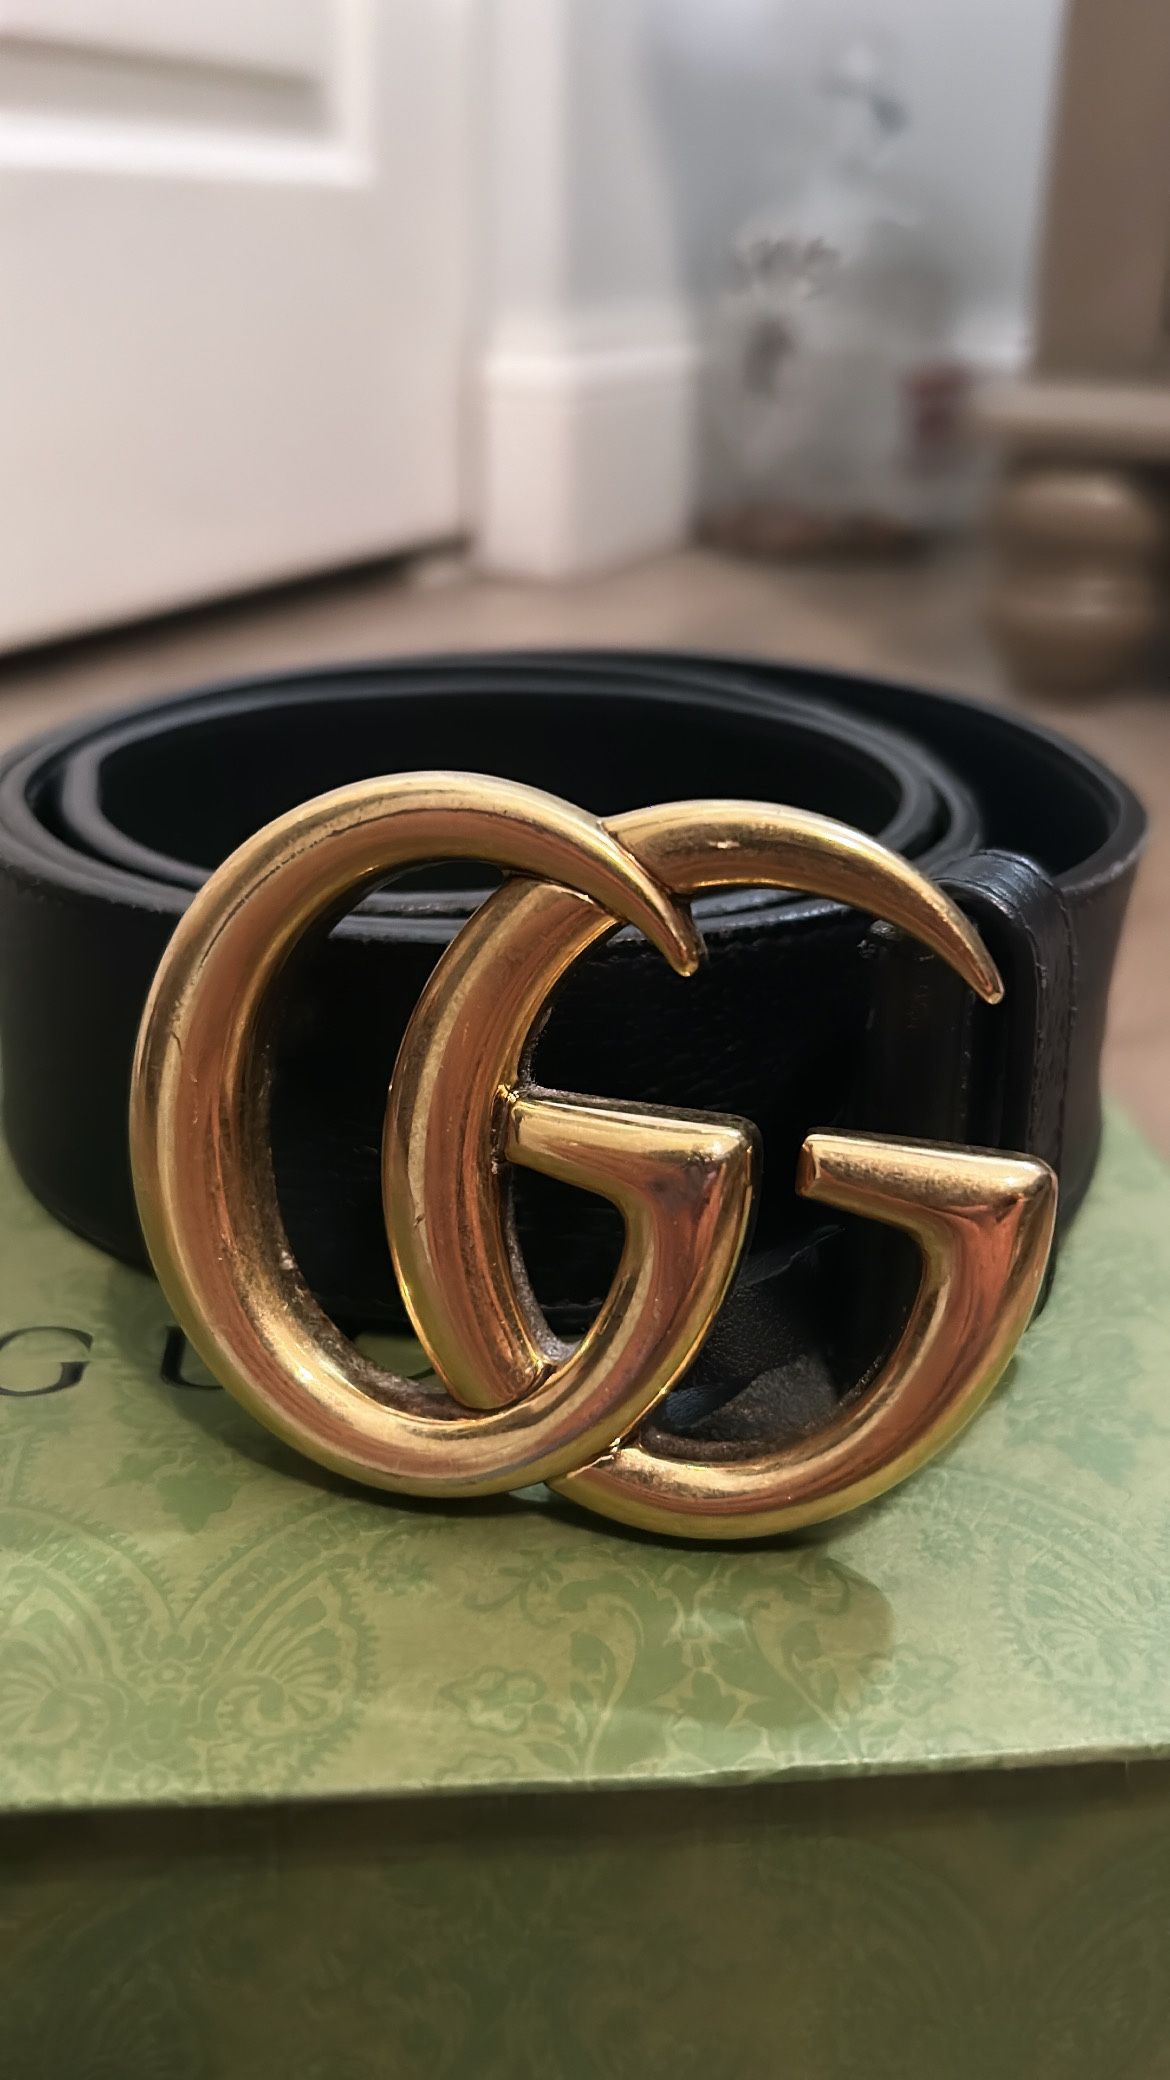 100% Real Authentic Gucci Belt